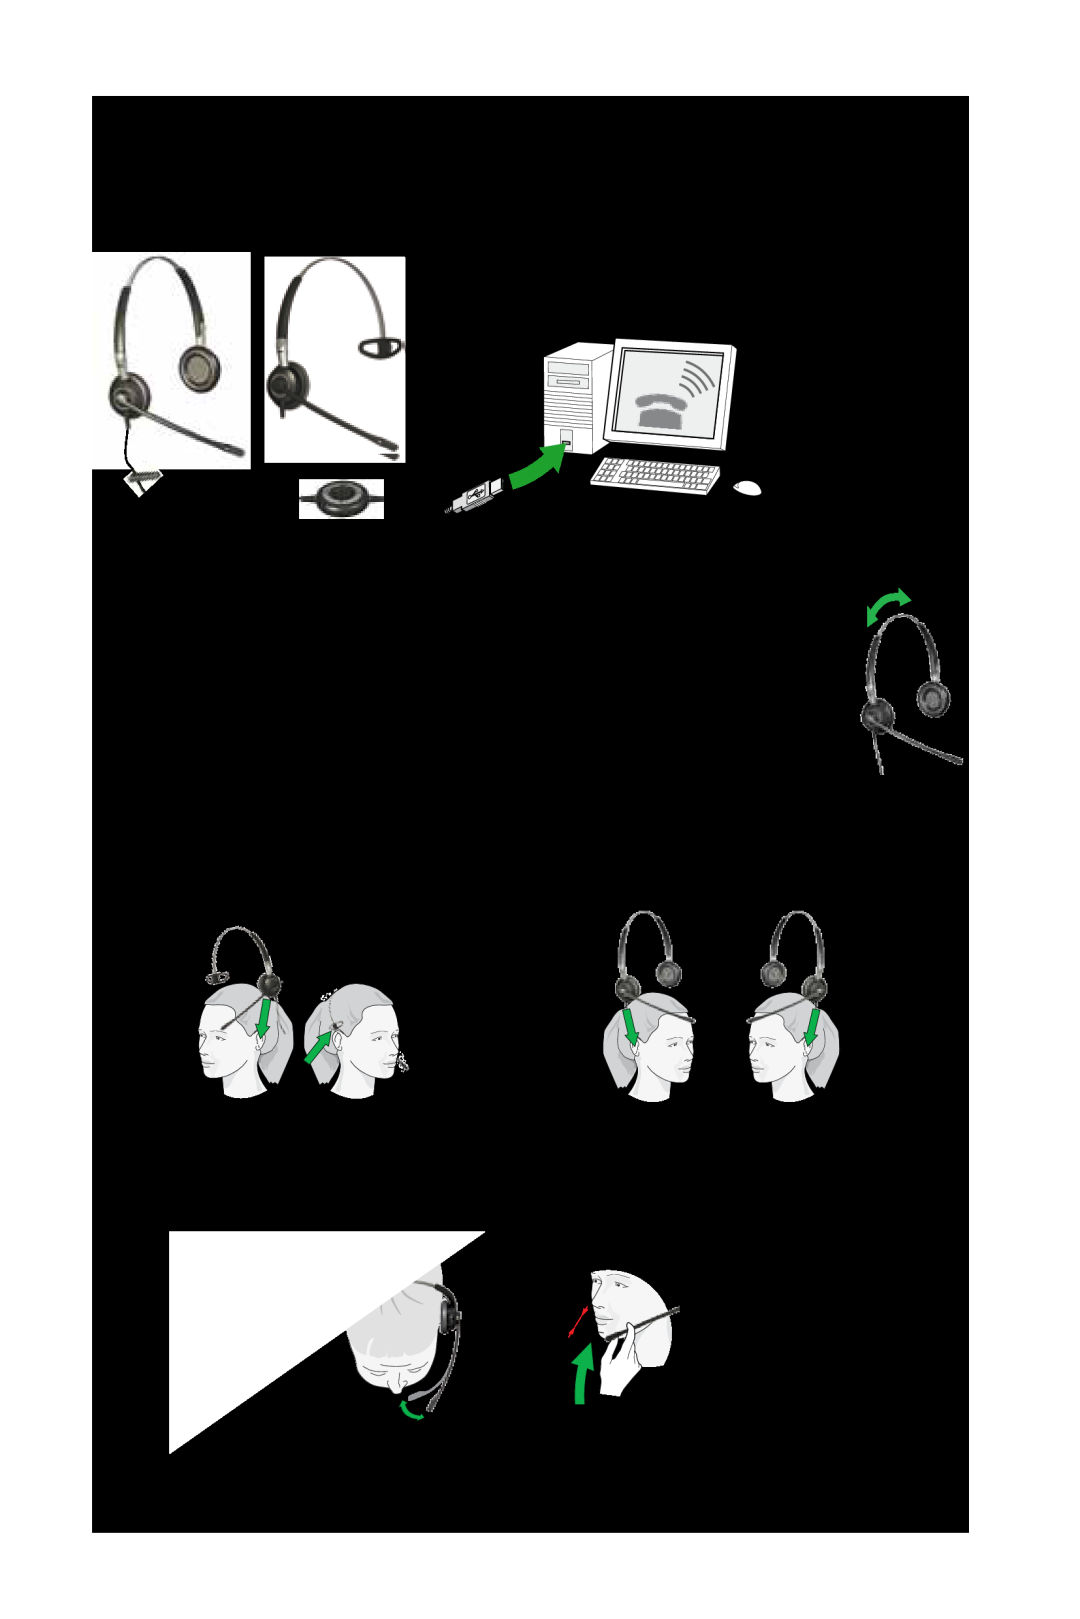 Jabra 2400 How to connect headset to PC, How to Wear the Duo and mono Headset, 2 cm 3/4, Adjust the headband length 